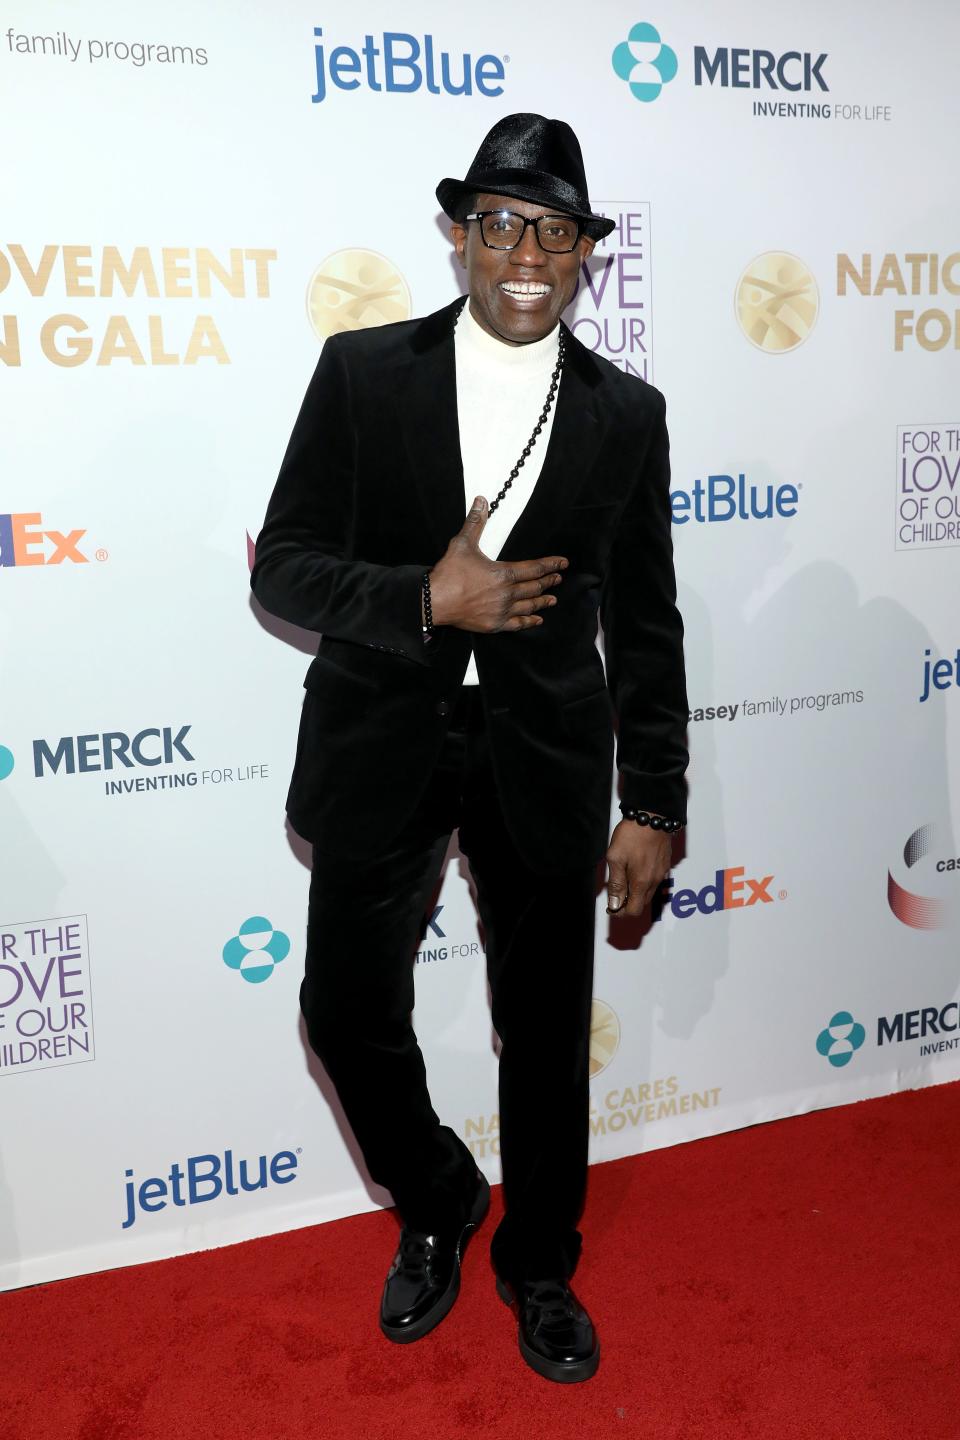 Wesley Snipes hits the red carpet at the National CARES Mentoring Movement Gala earlier this year.